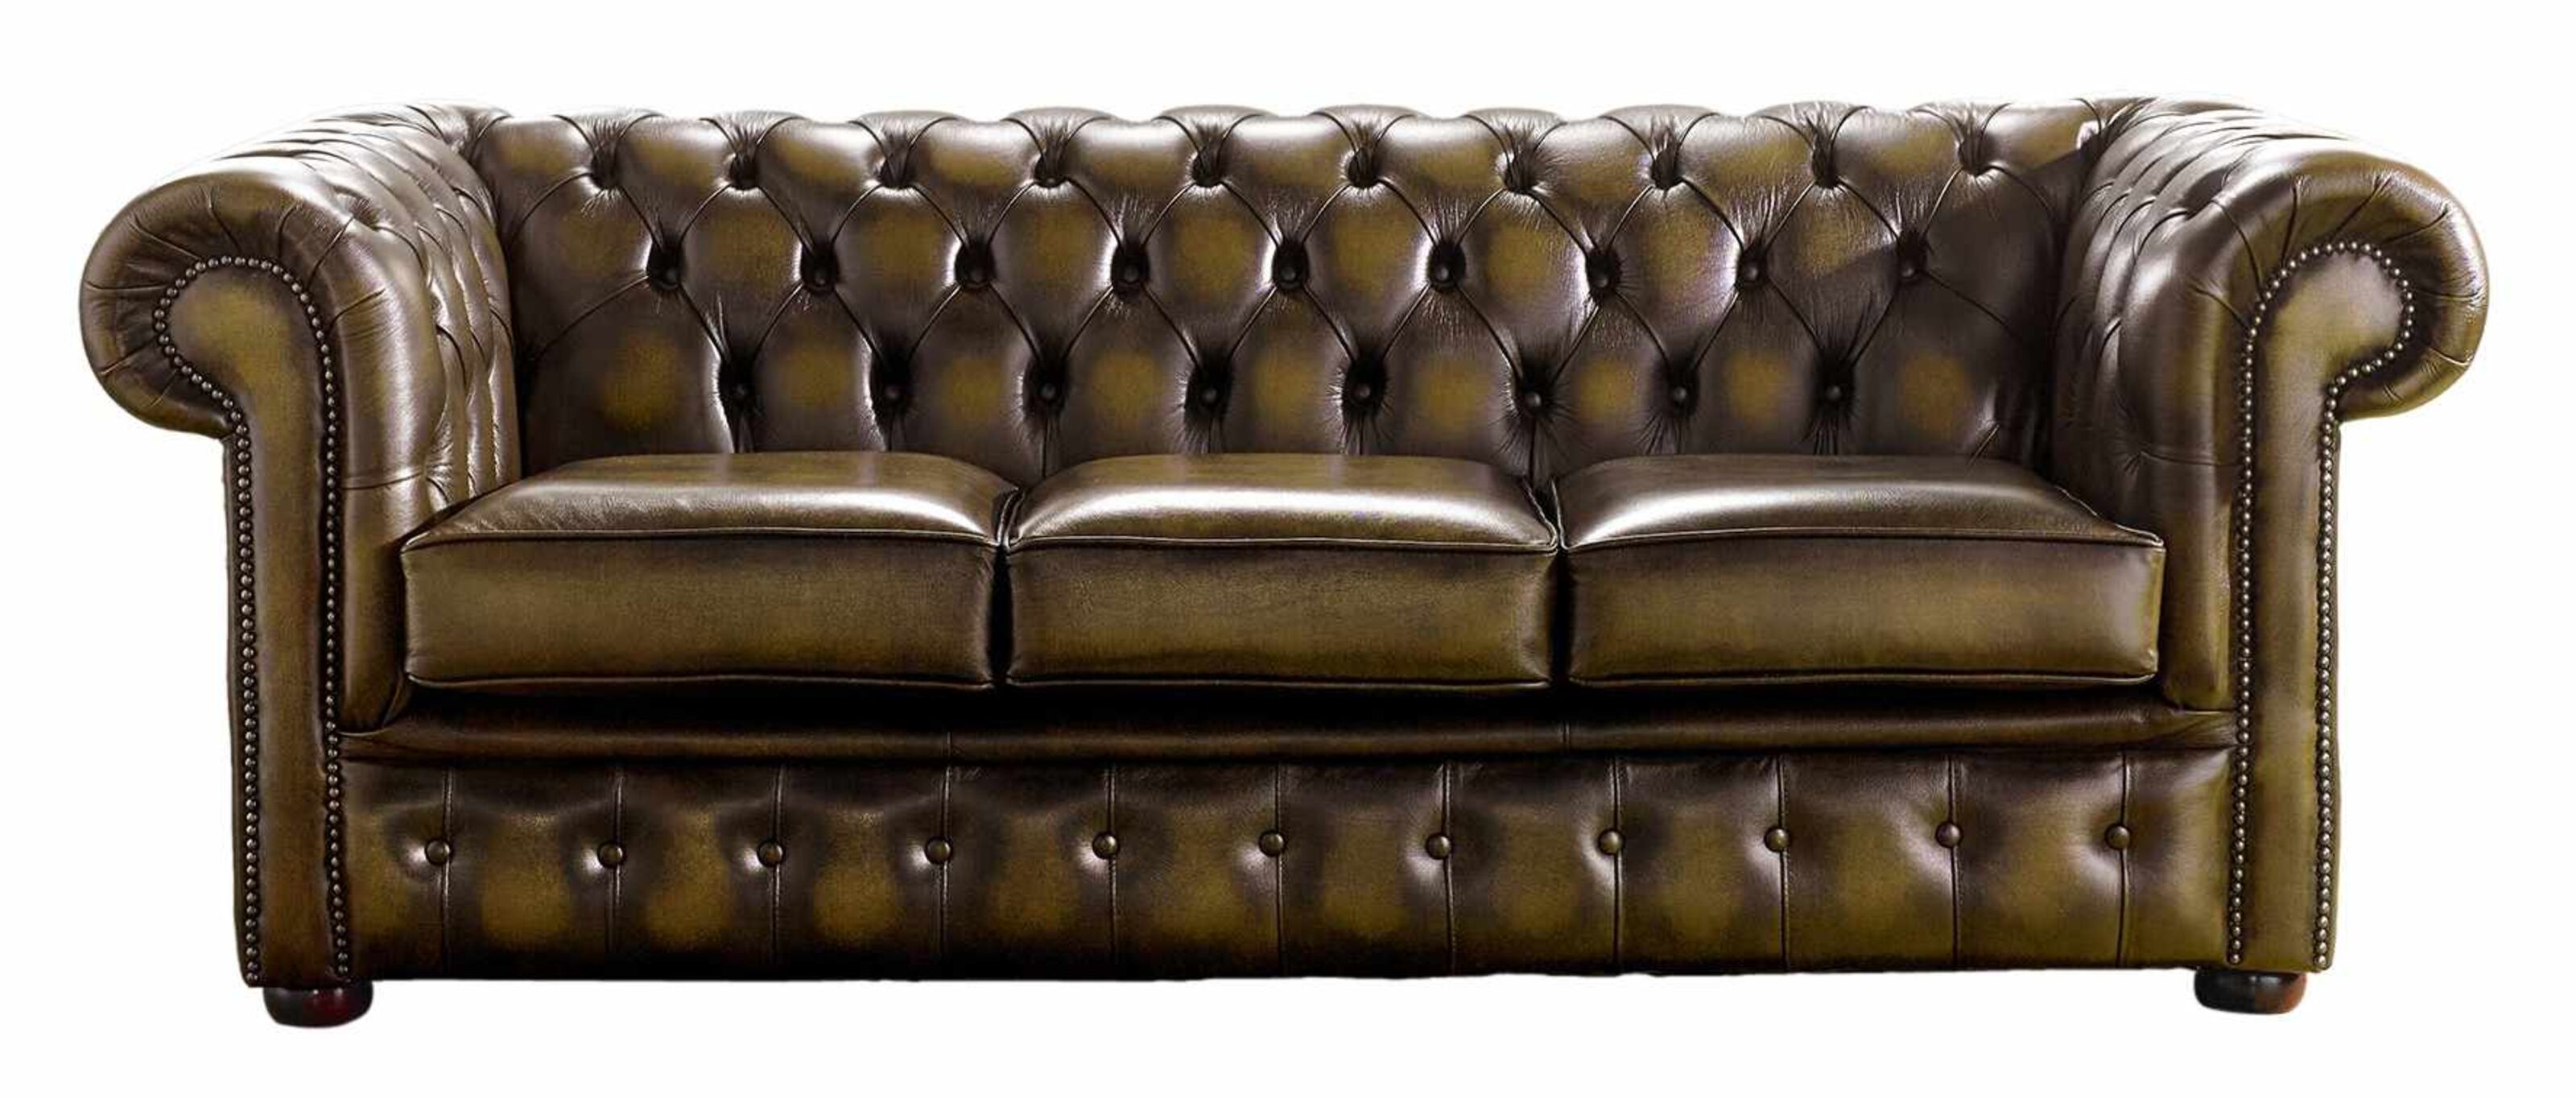 Britannia's Best Chesterfield Sofas Setting Trends Across England  %Post Title